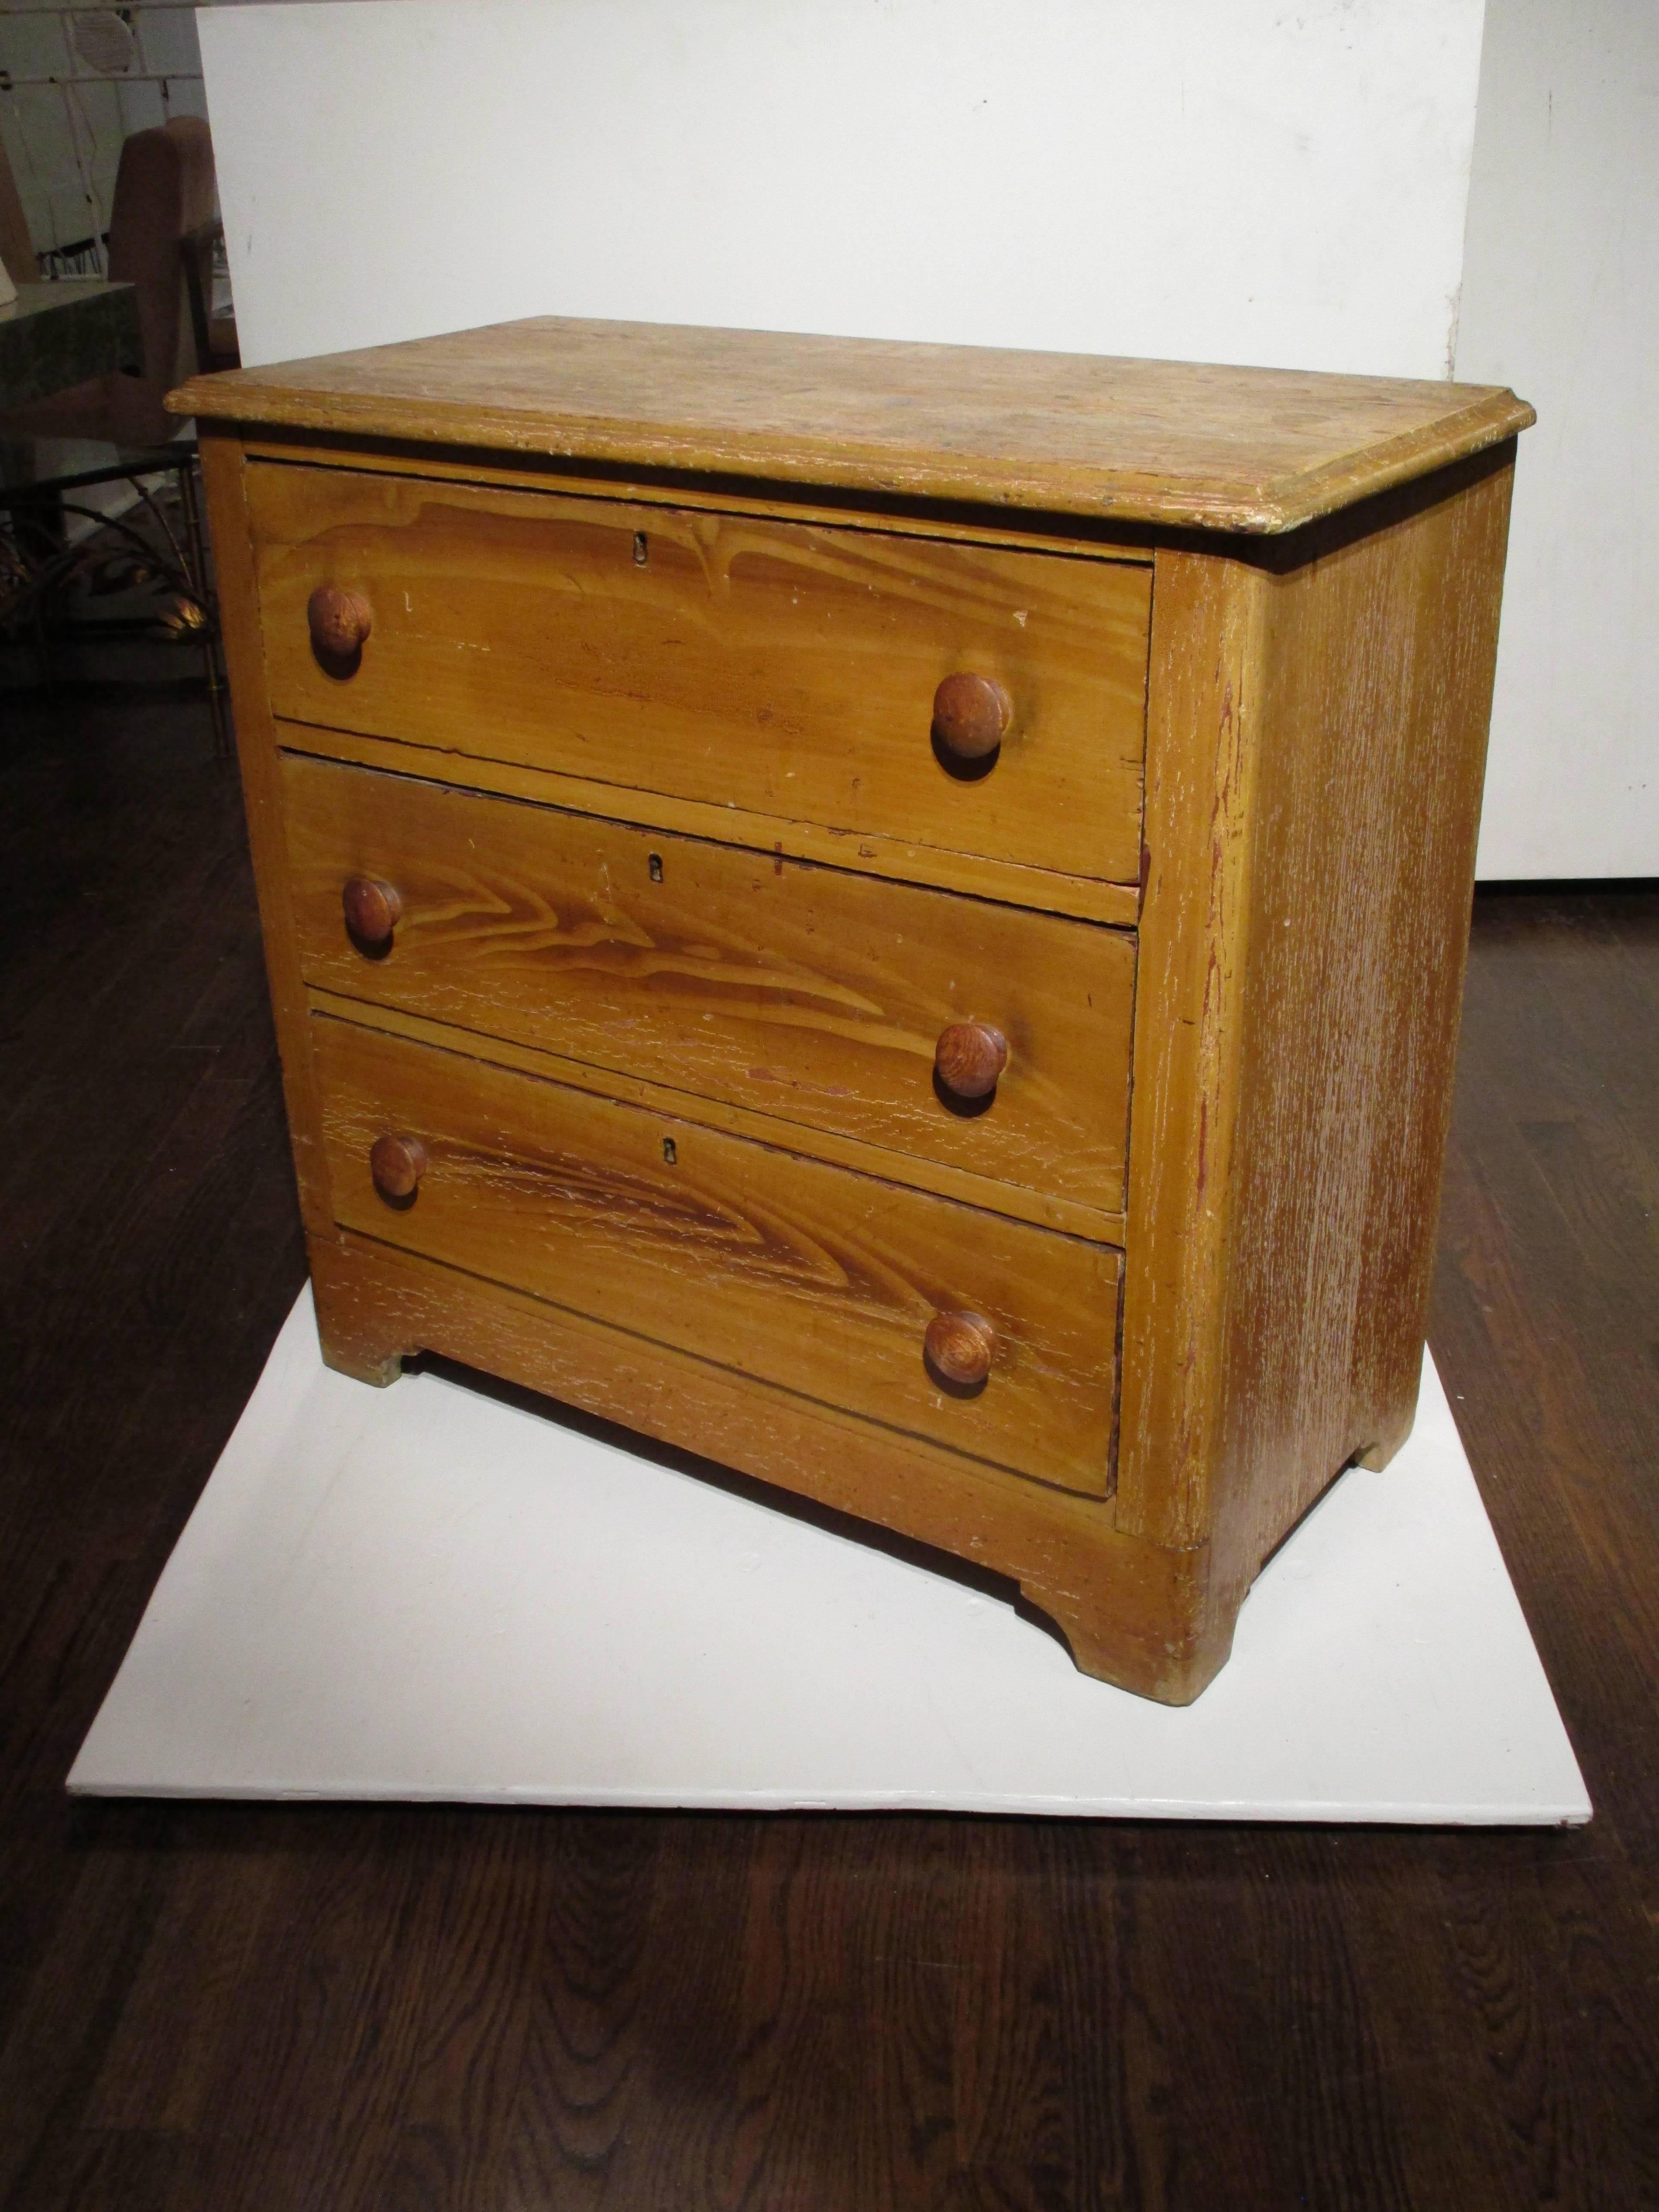 A 19th century grain painted three drawer chest. Eastport, NY.